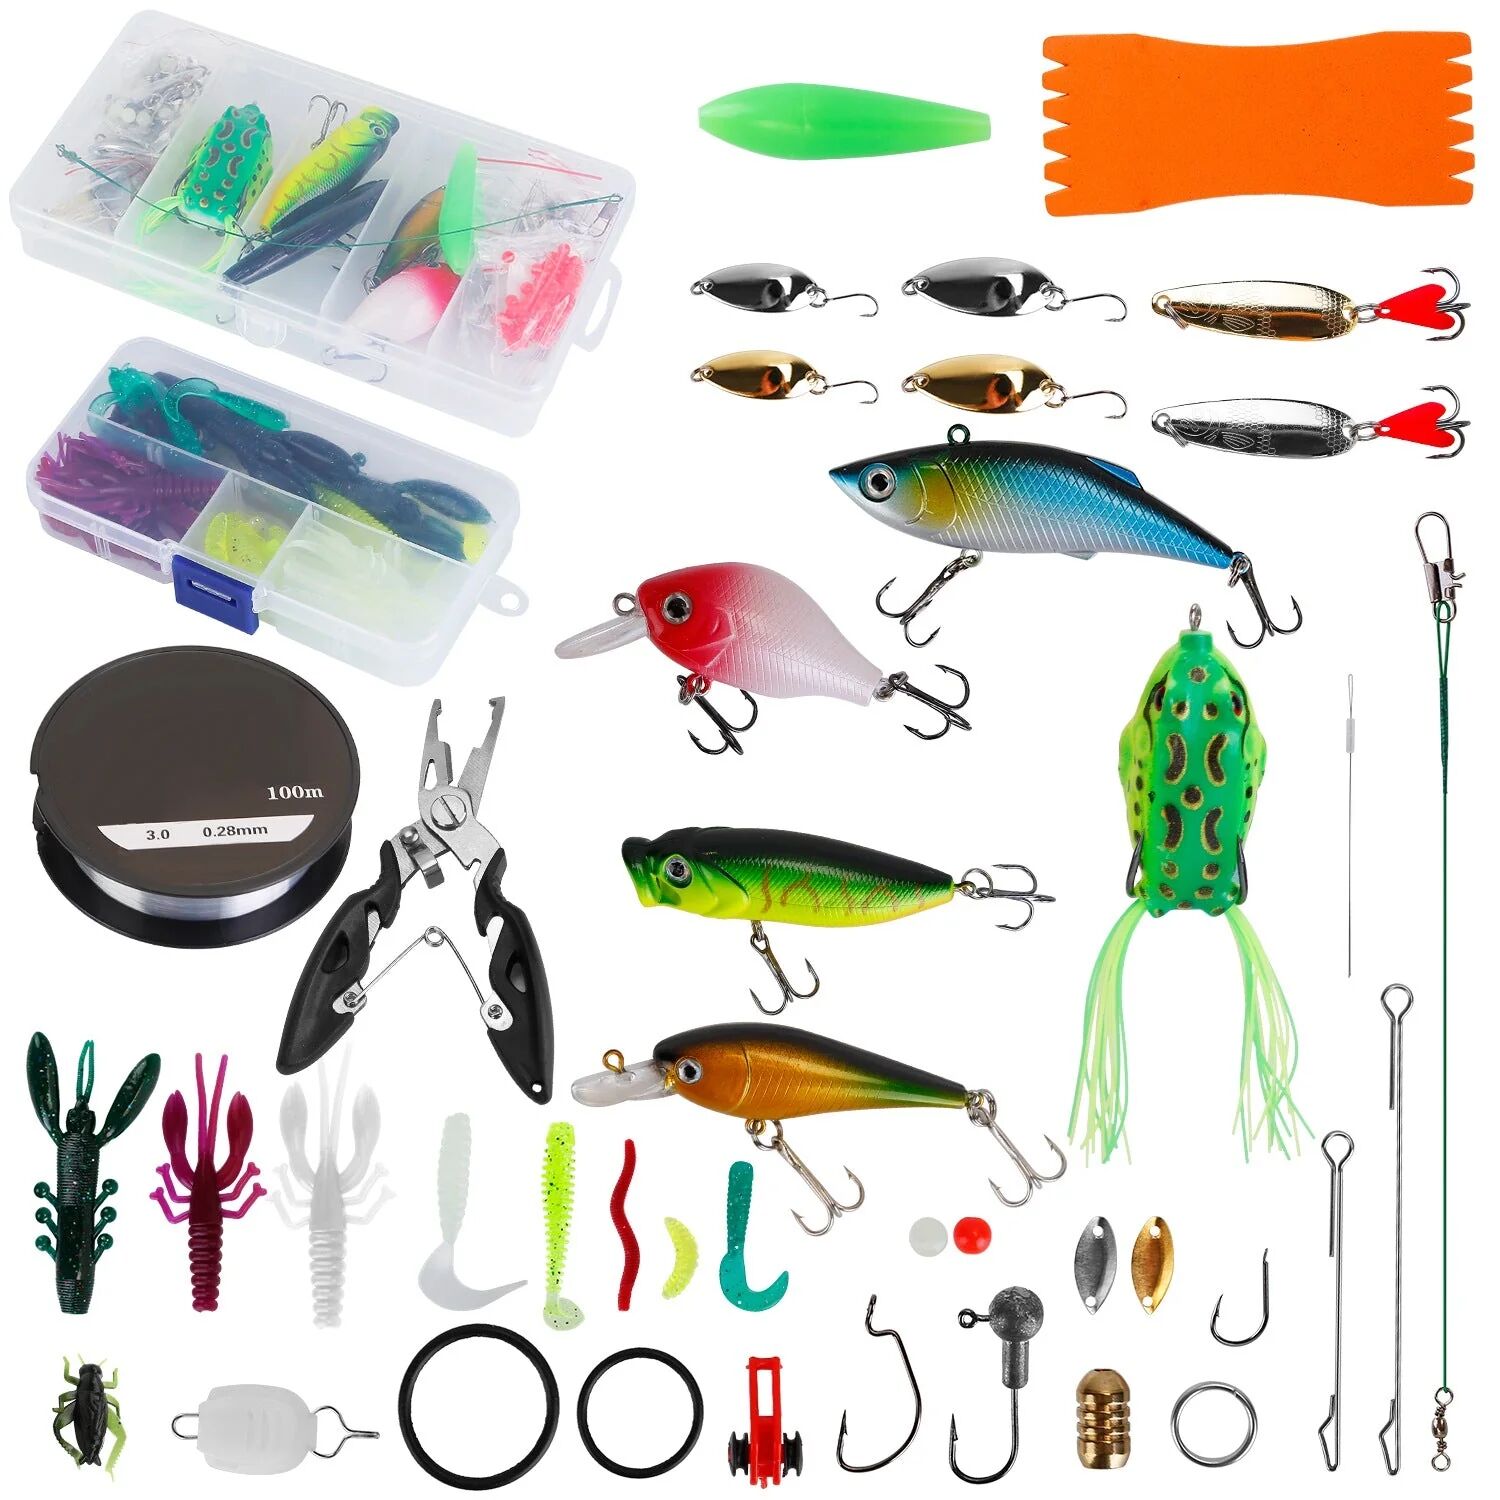 DailySale 383-Piece: Fishing Lures Tackle Box